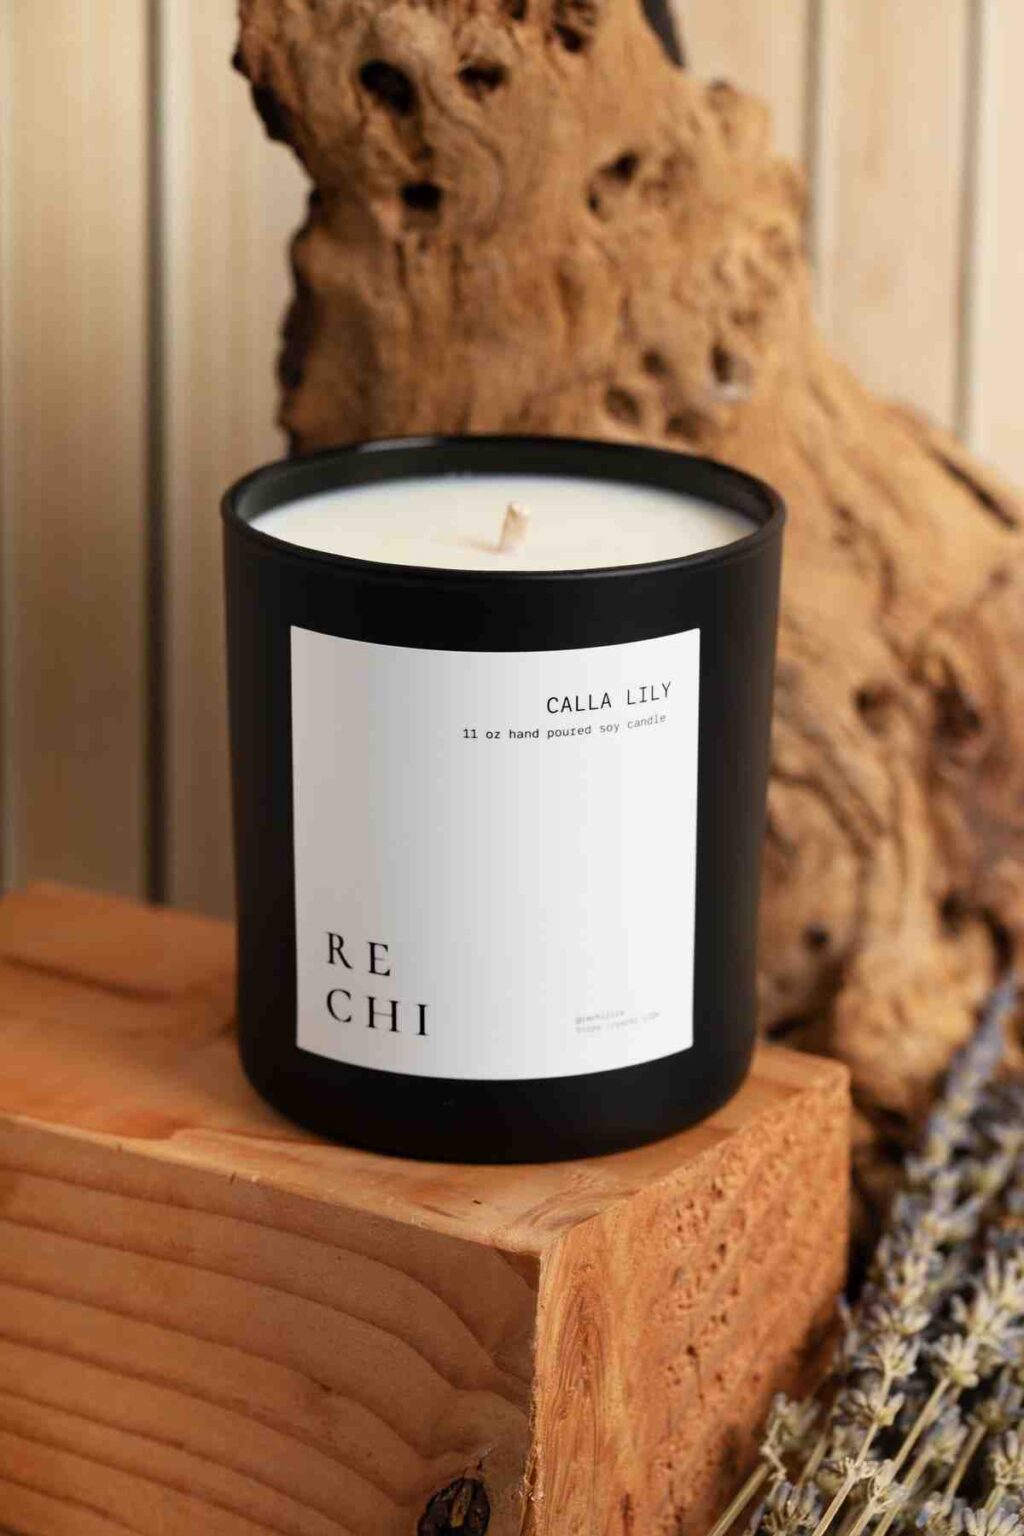 Restore balance with ReChi's Calla Lily Candle! Hand-poured bliss merges hydrangea and cherry blossom for a sophisticated scent, rooted in Eastern wellness. Unwind now!